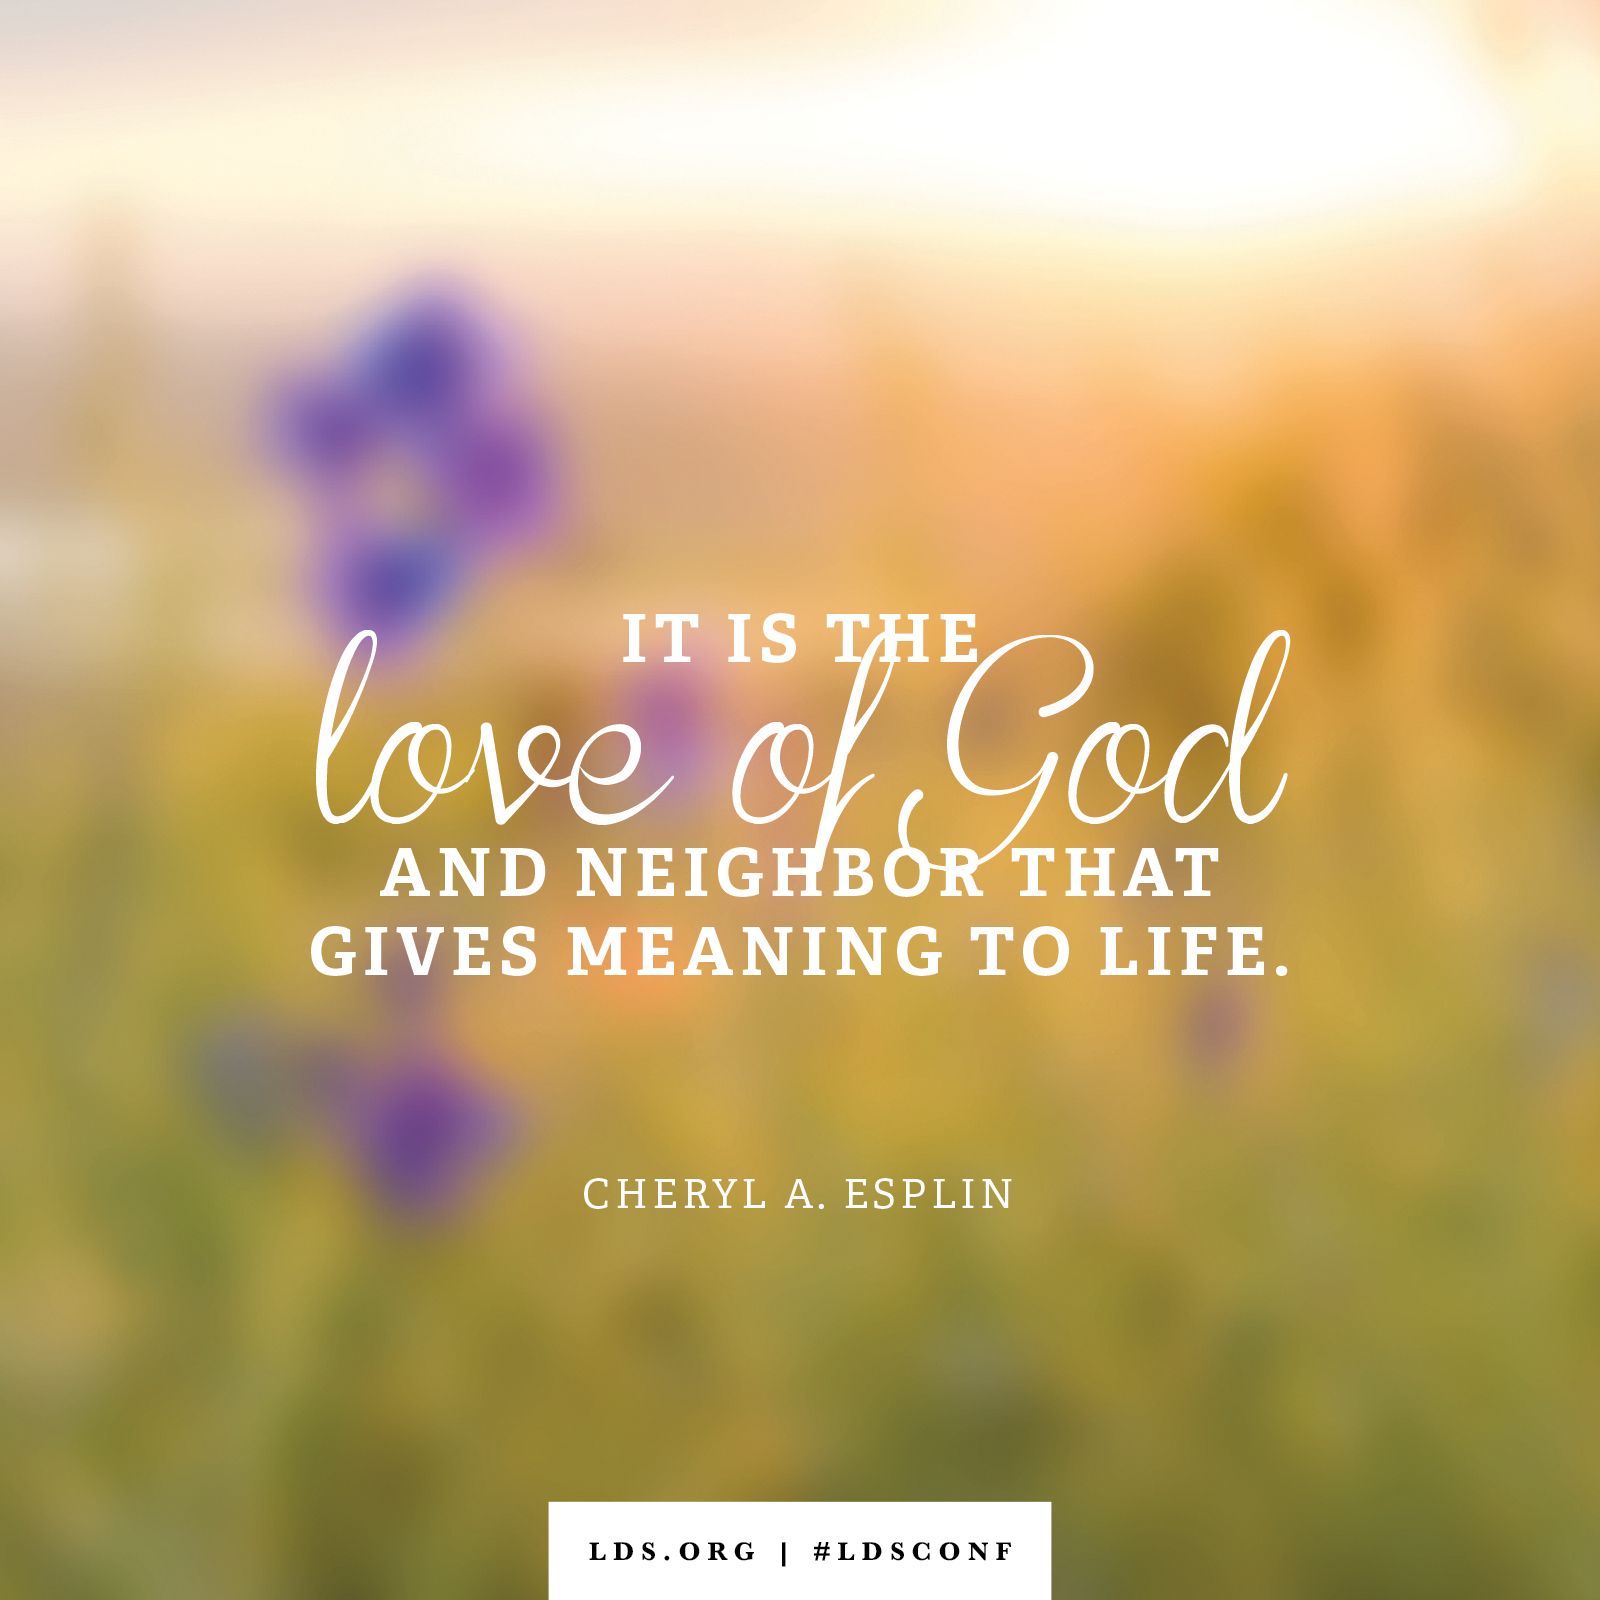 “It is the love of God and neighbor that gives meaning to life.” —Cheryl A. Esplin, “He Asks Us to Be His Hands”